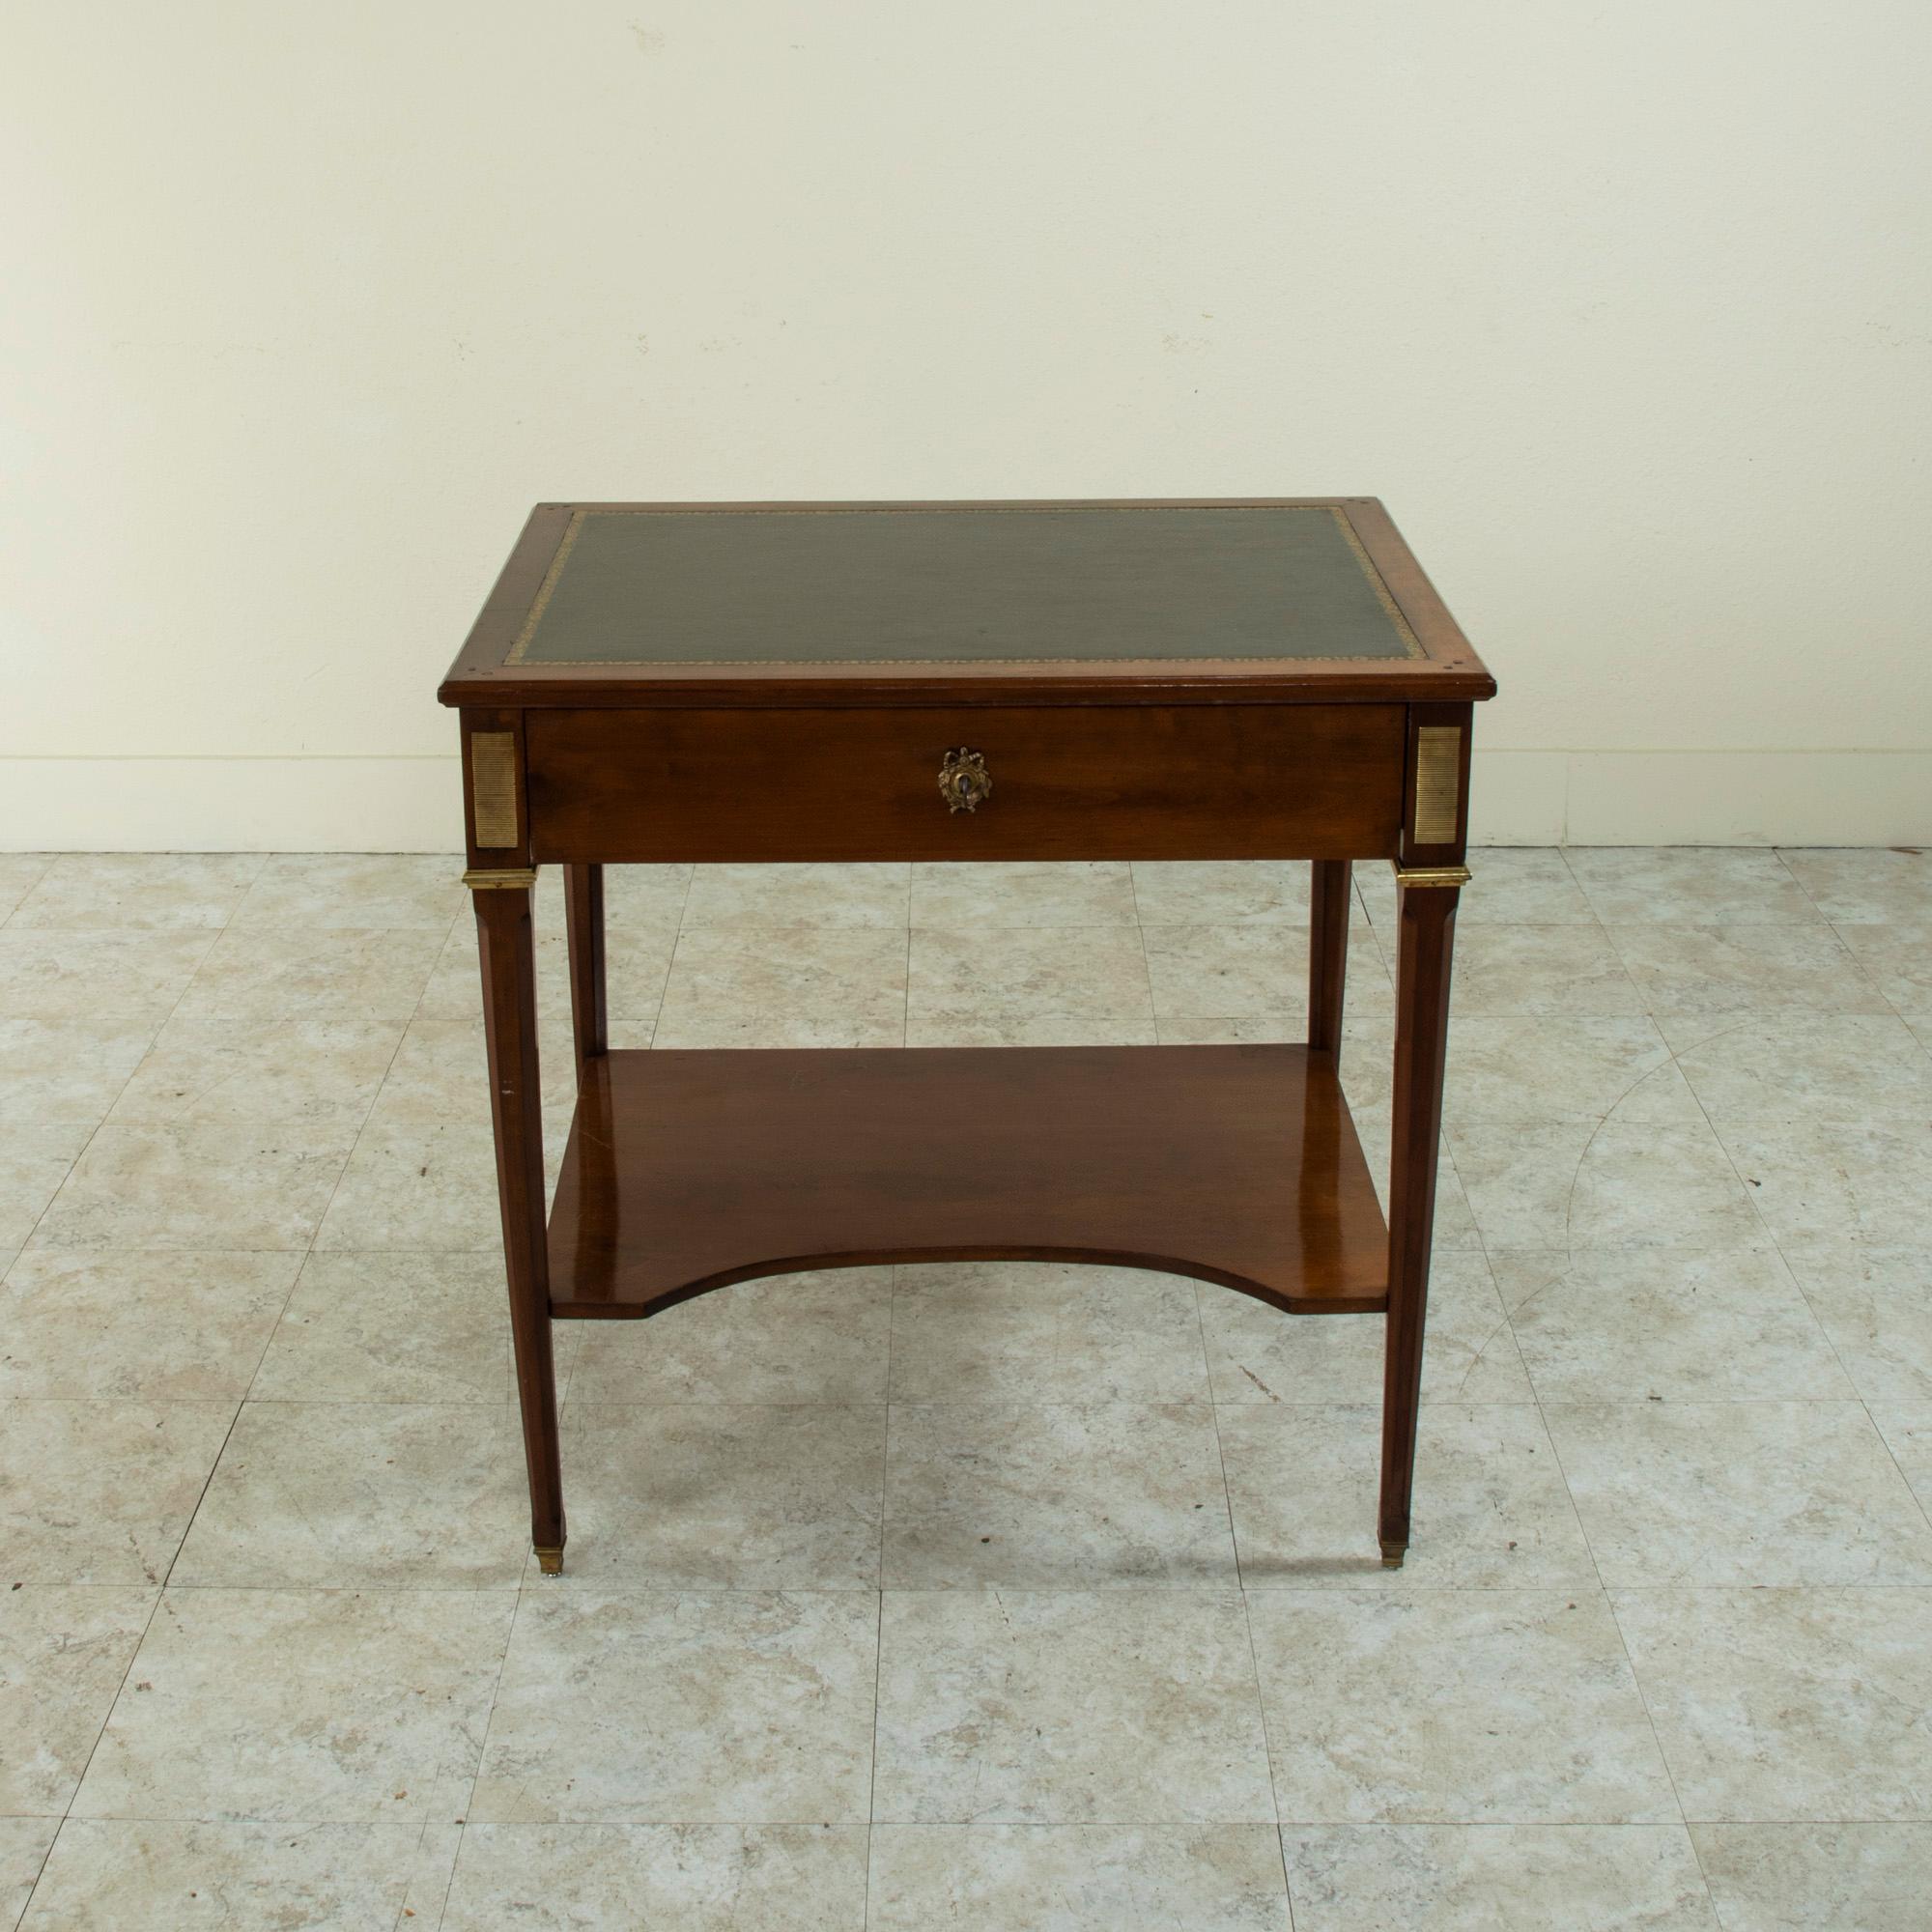 This mid-20th century Louis XVI style fruitwood side table or end table features a gold tooled green leather top and a drawer with a drop down pullout writing desk. Its drop down surface locks using its own key. Striated bronze plaques adorn the